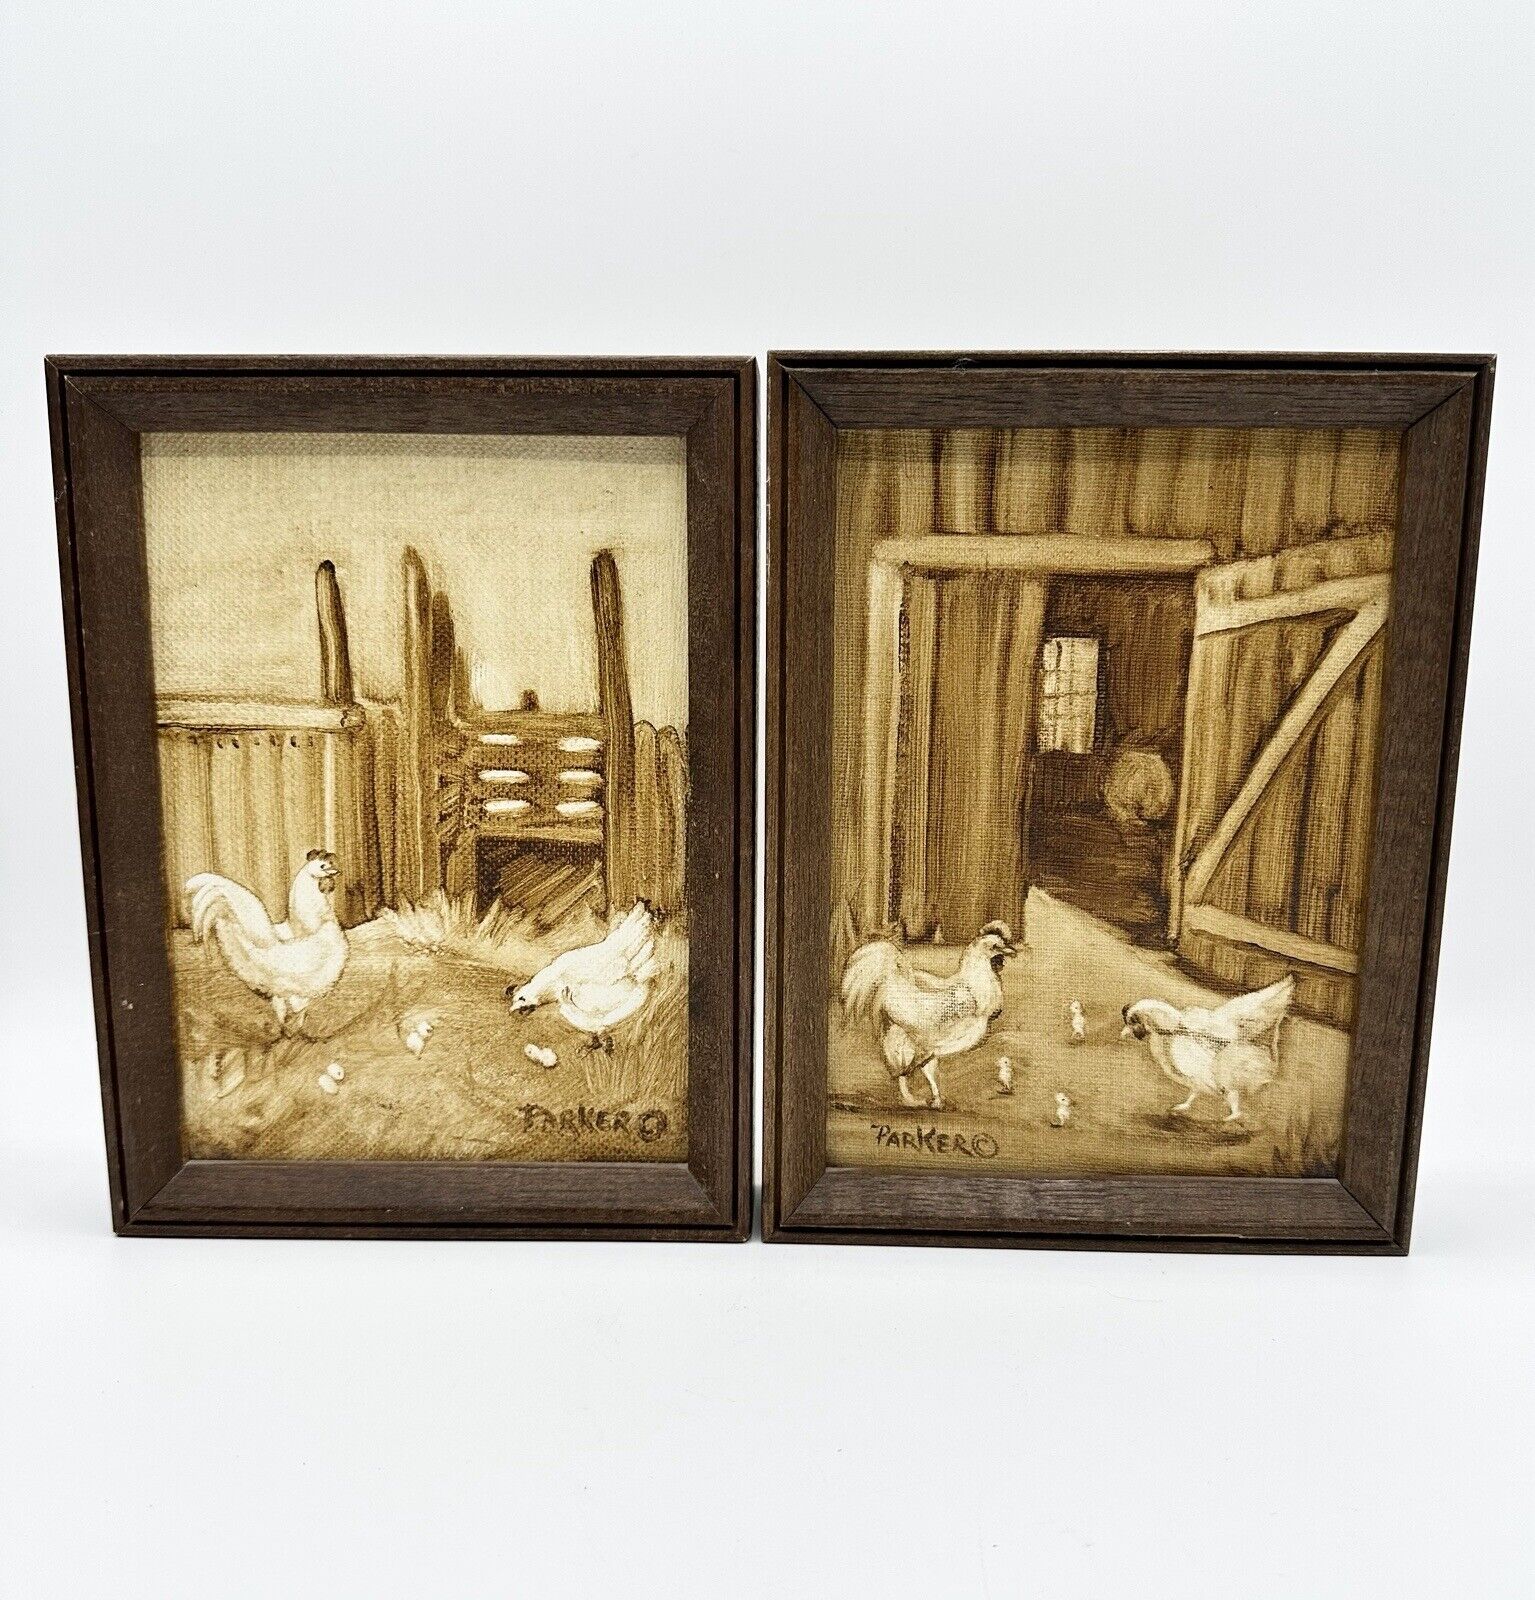 Framed Chicken Coop Chicks Paintings Country Decor Pair 8”x6” Sepia Signed Barn